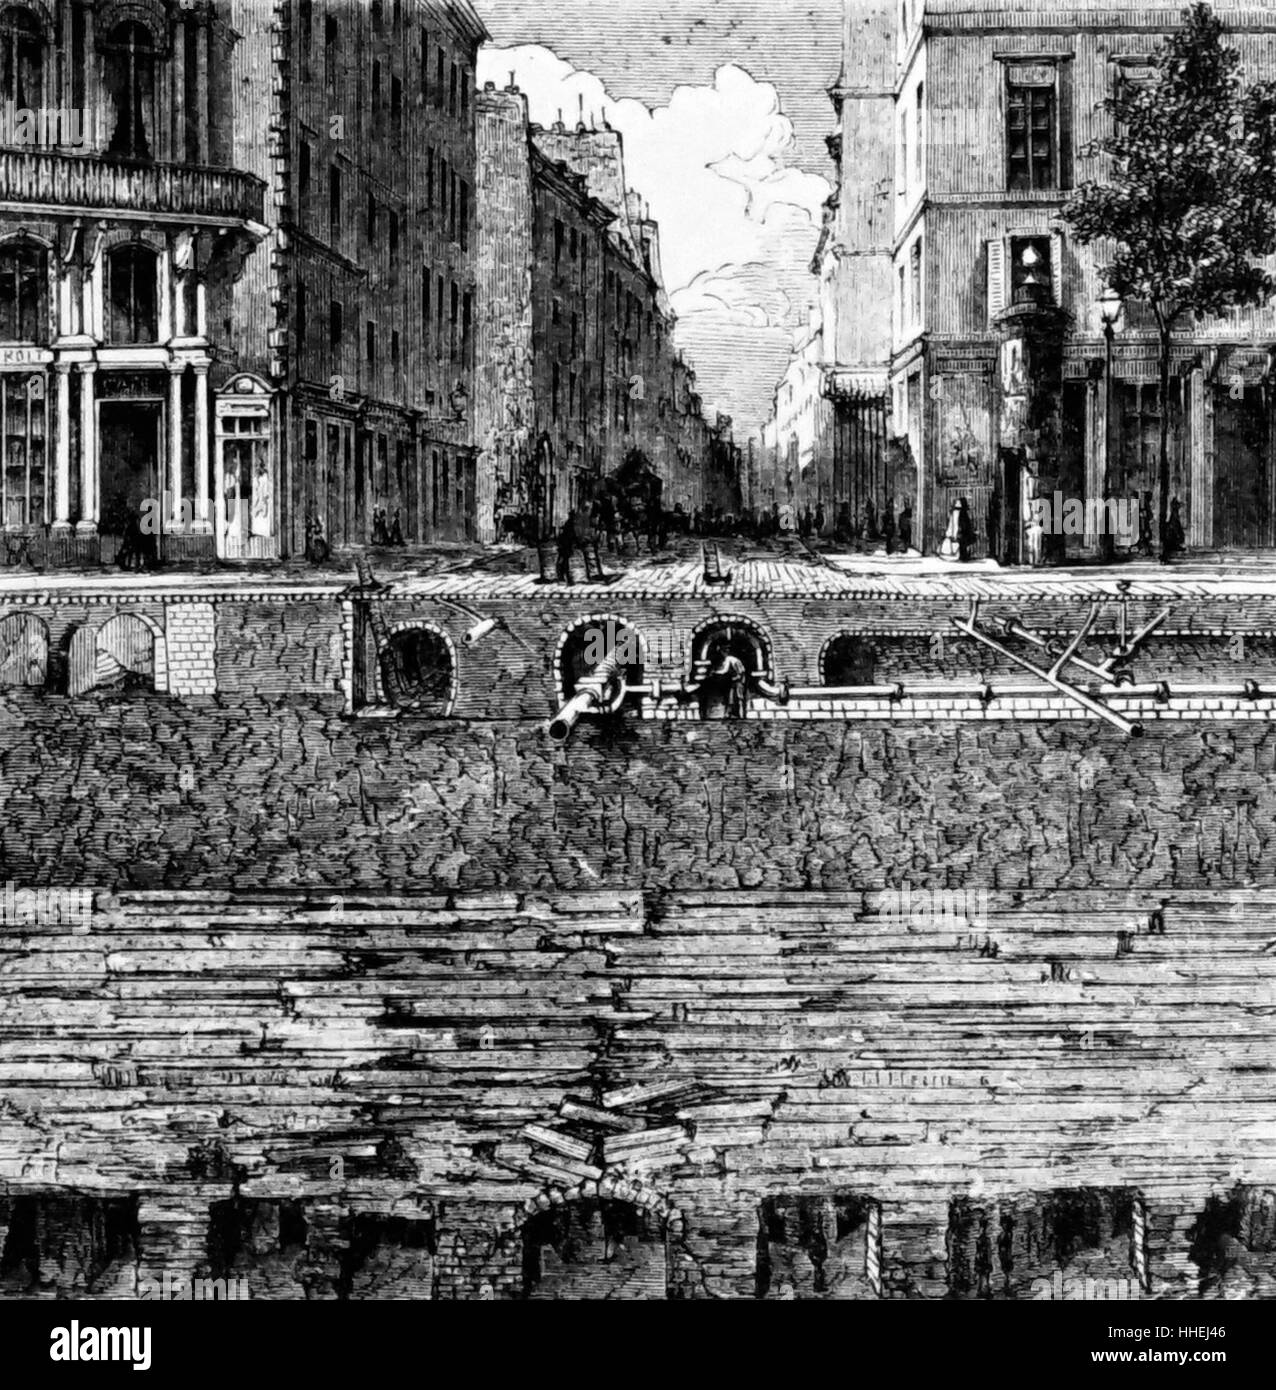 Engraving of a cross-section of a Paris street showing location of public services. Dated 19th Century Stock Photo